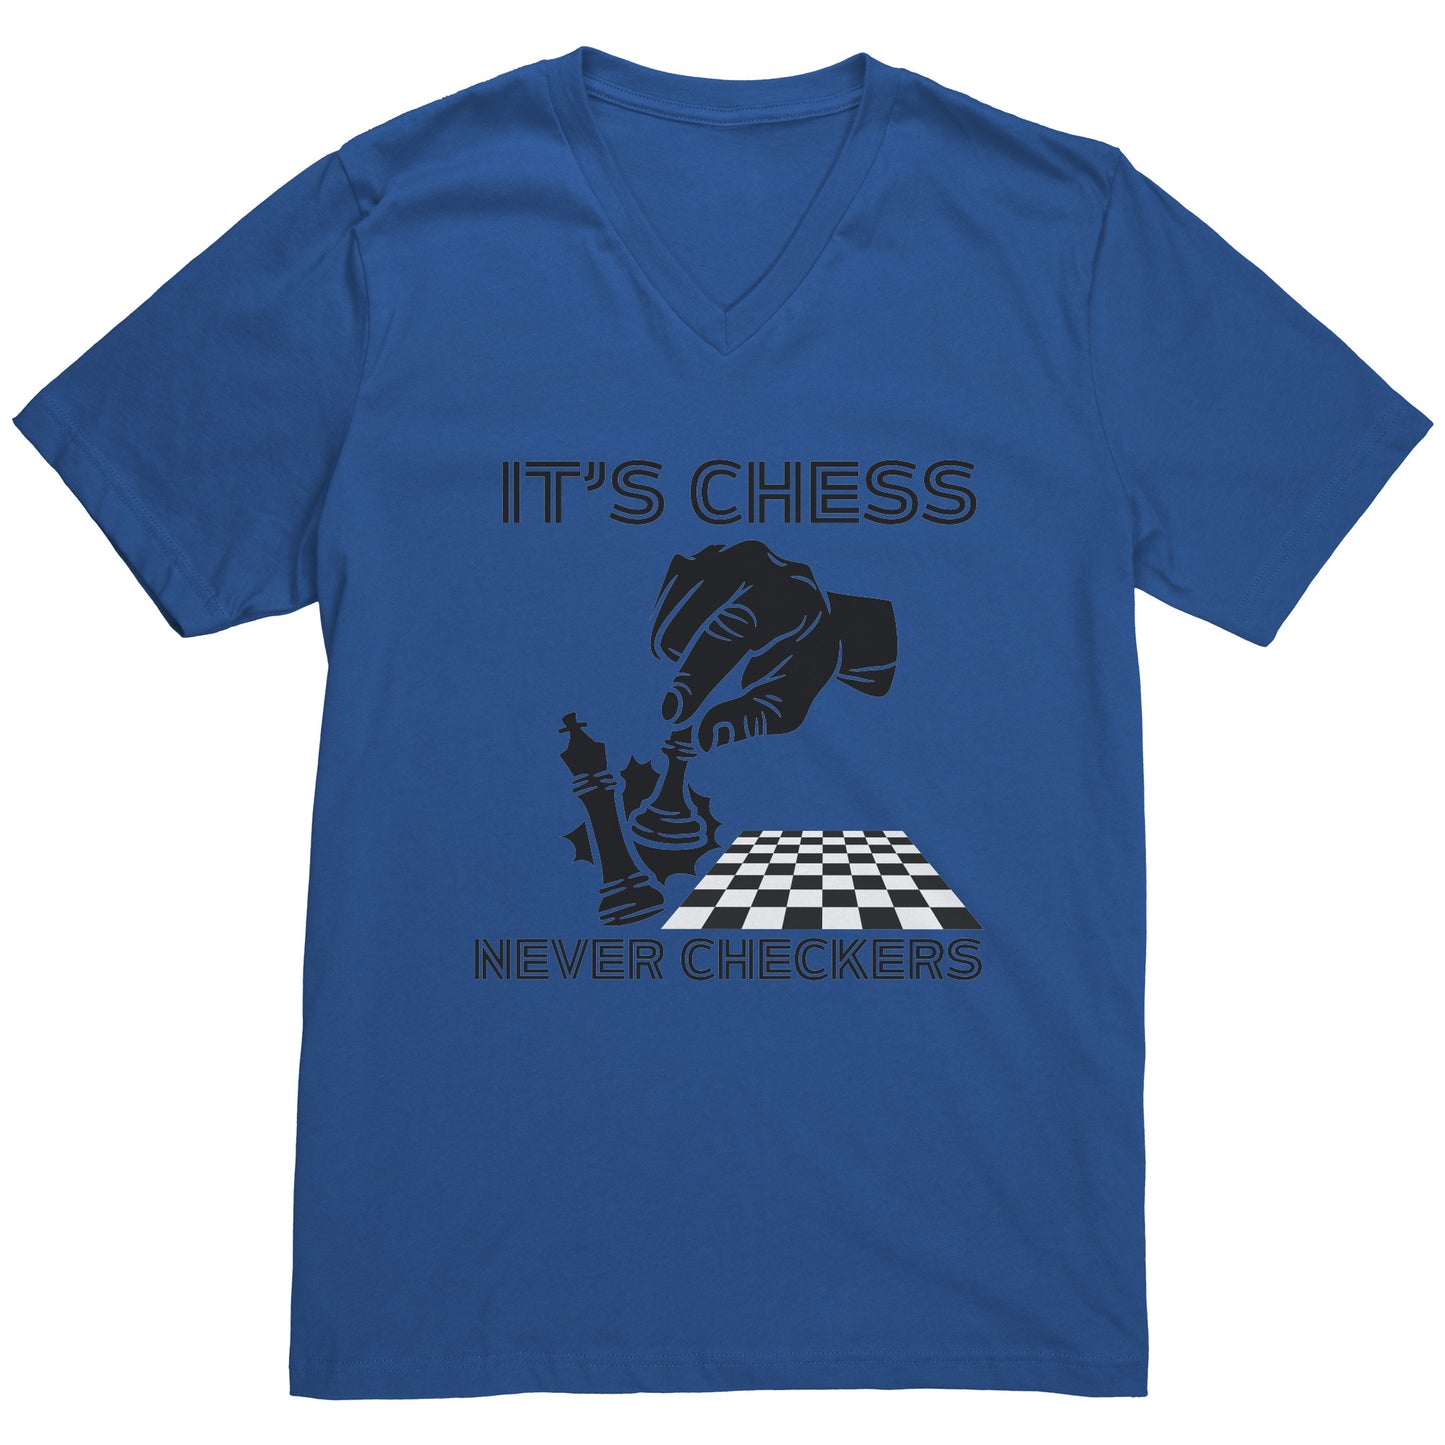 It's Chess, Never Checkers Men's Apparel